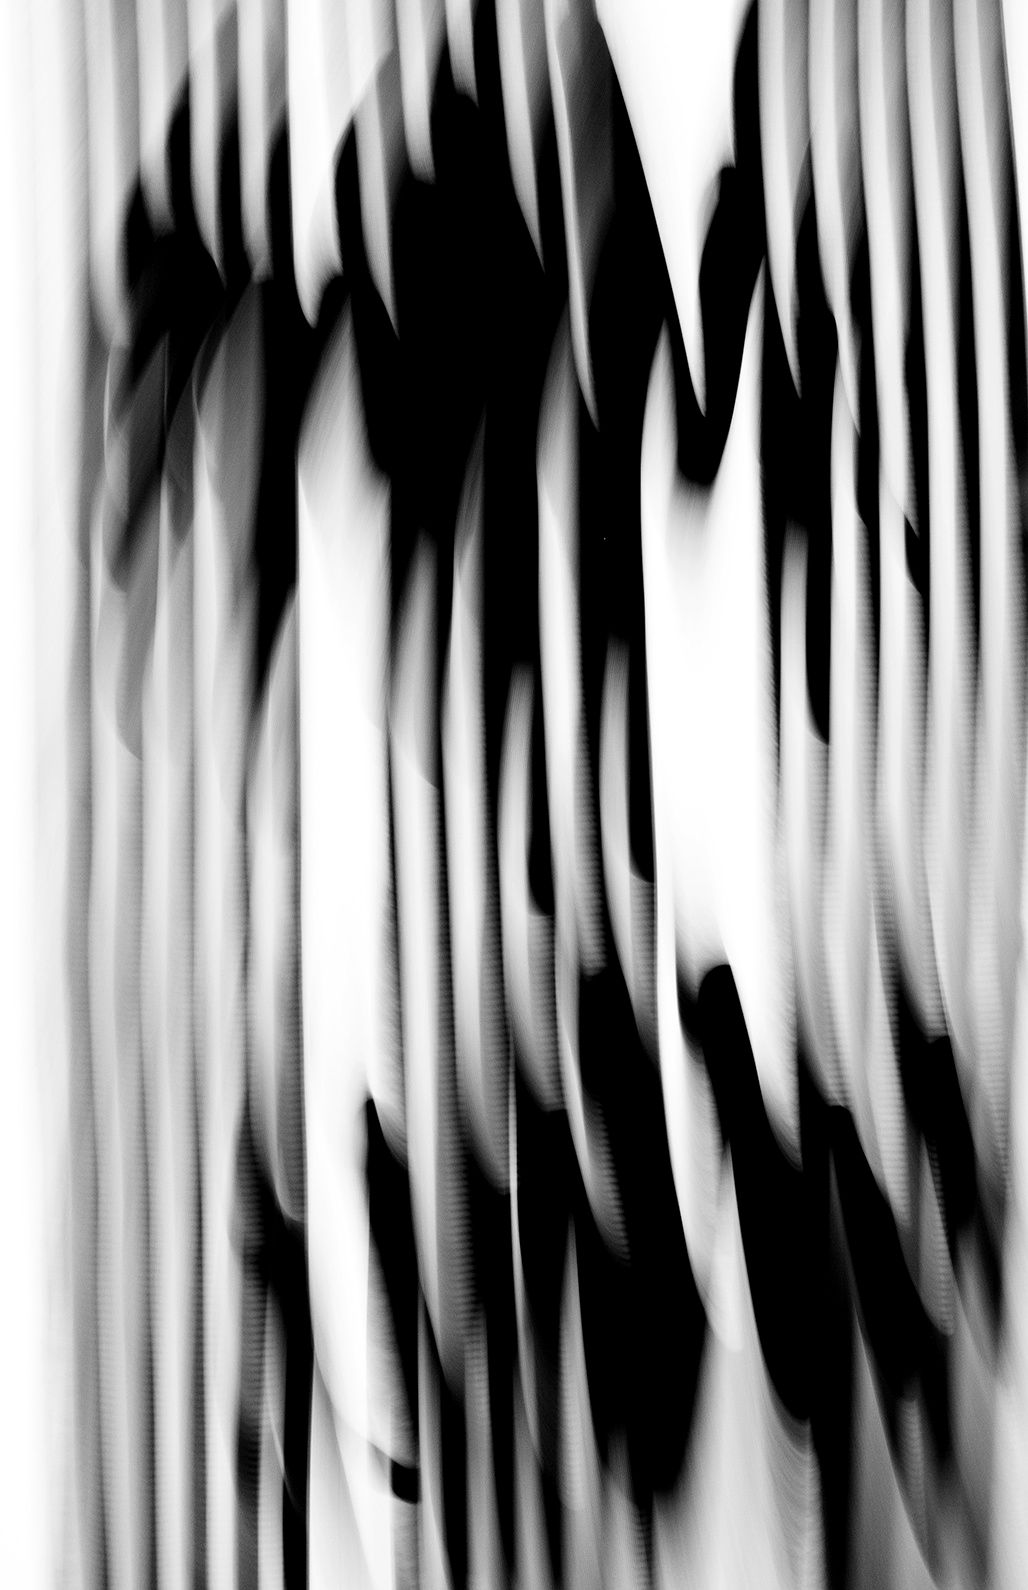 Untitled, M. Doodles 2, 2014, Black and White Abstract Photography, Shirine Gill